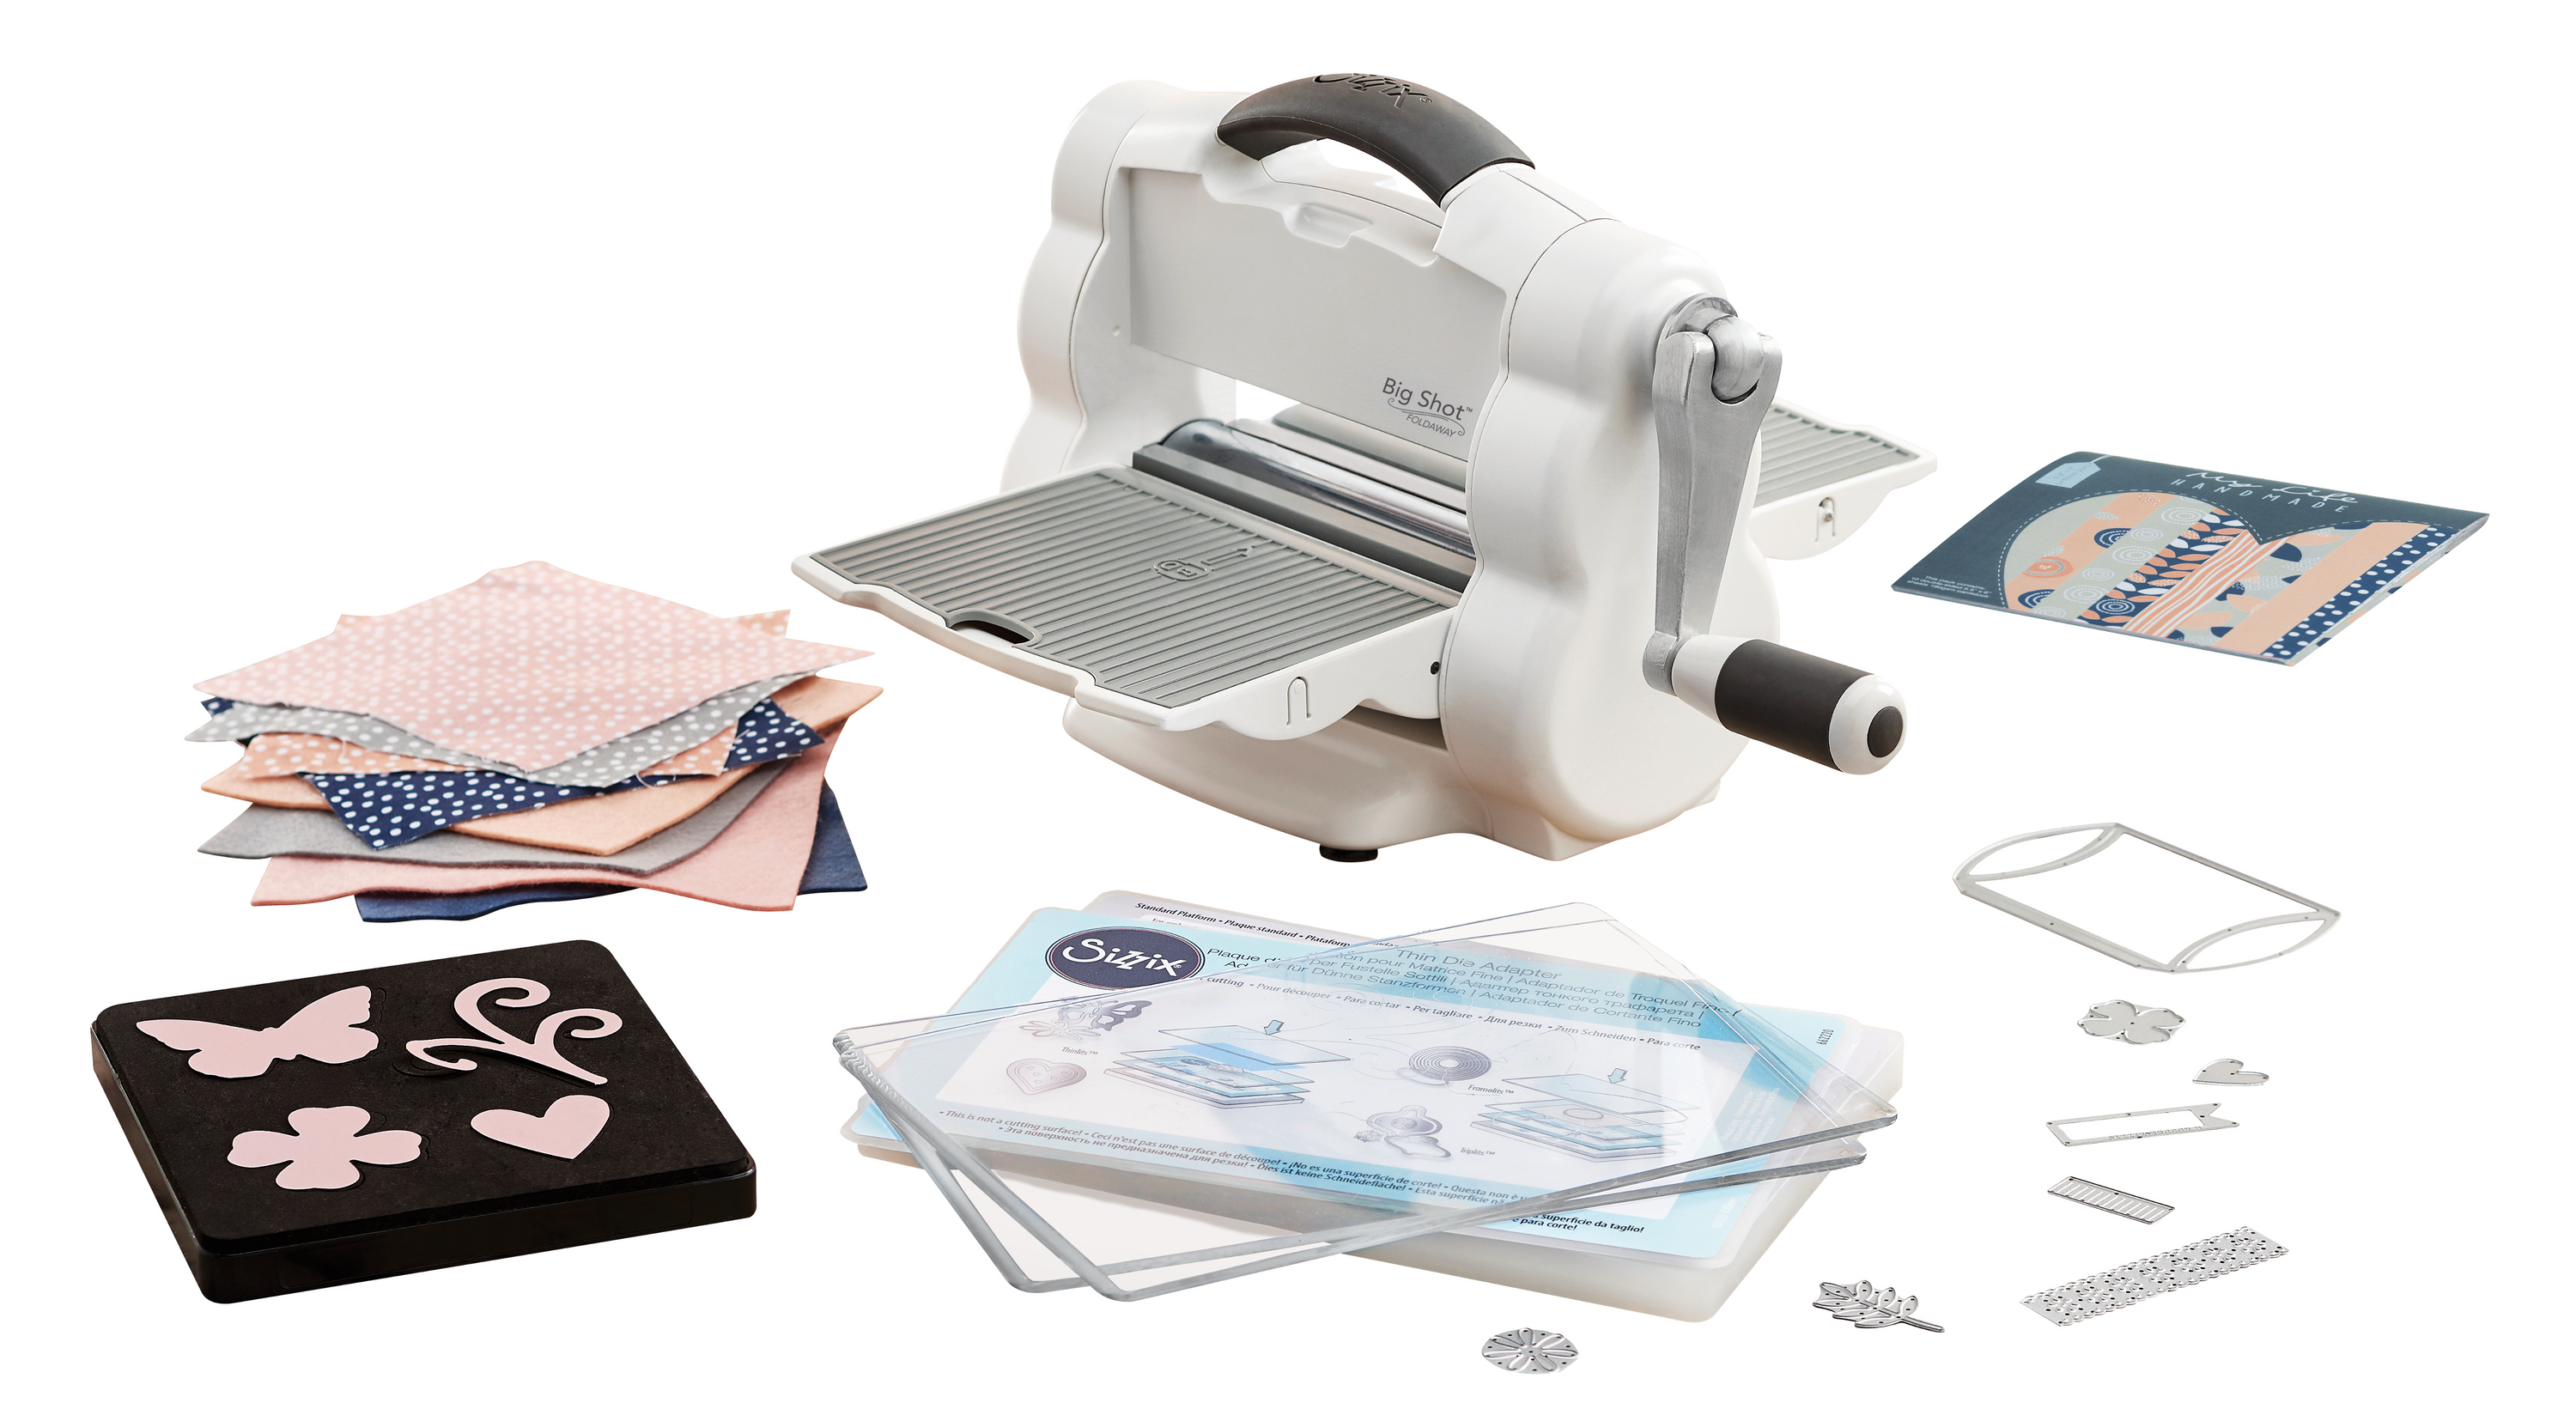 Sizzix Big Shot Plus Manual Die Cutting & Embossing Machine with Lace  Embossing Folder